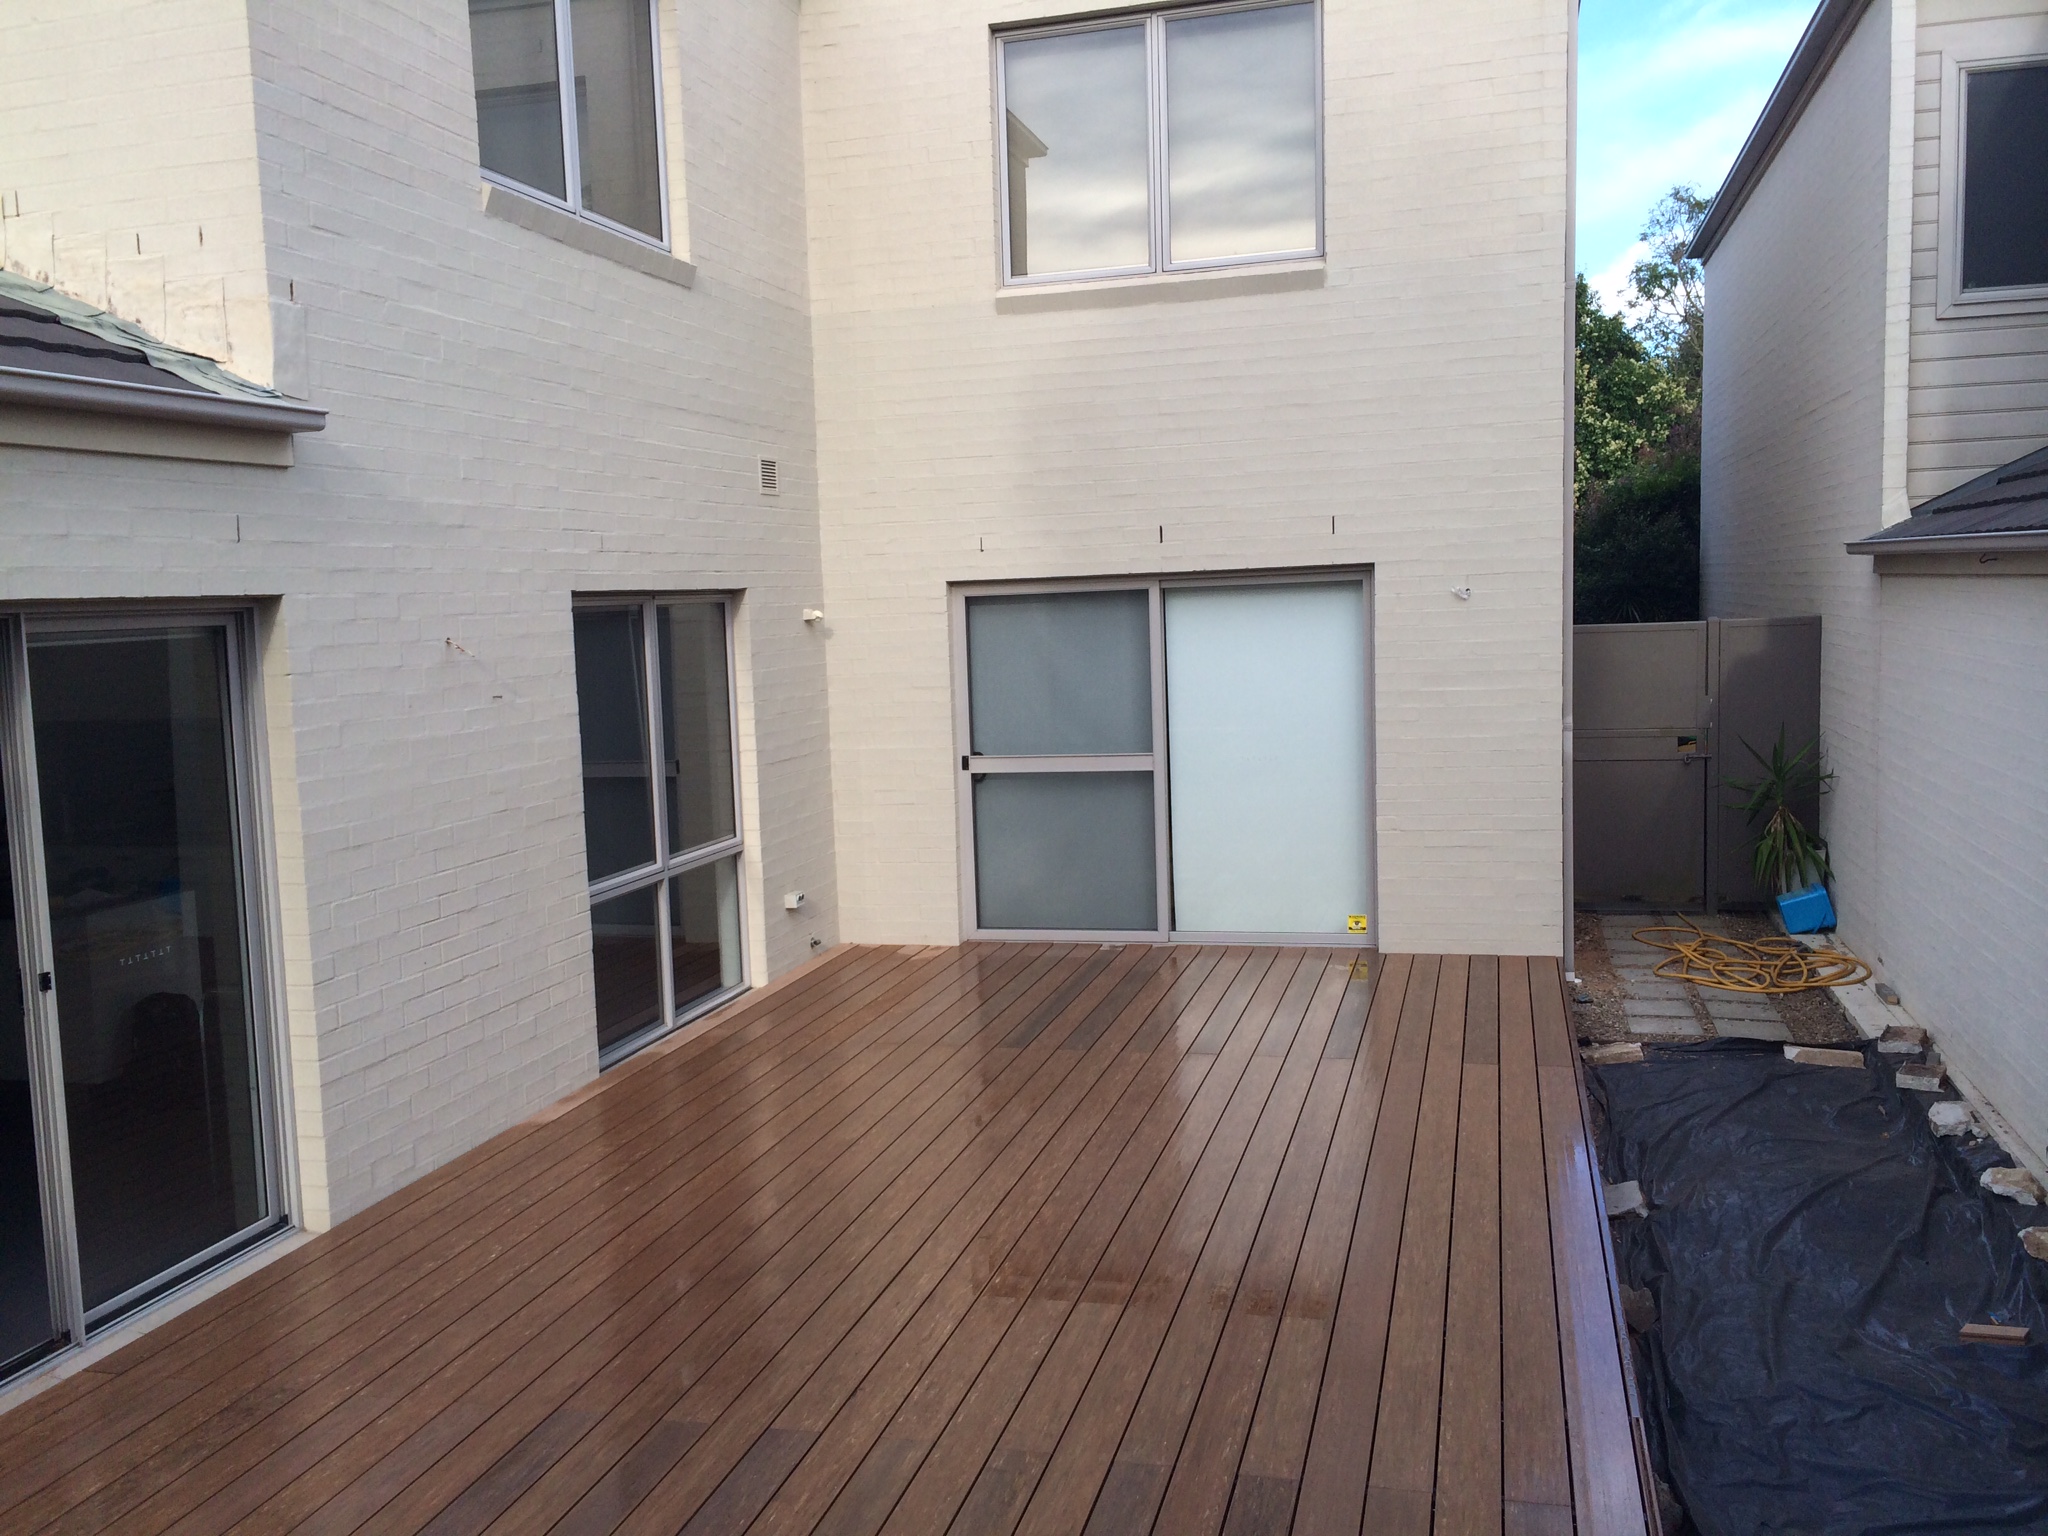 Boxspan deck frame over existing paving